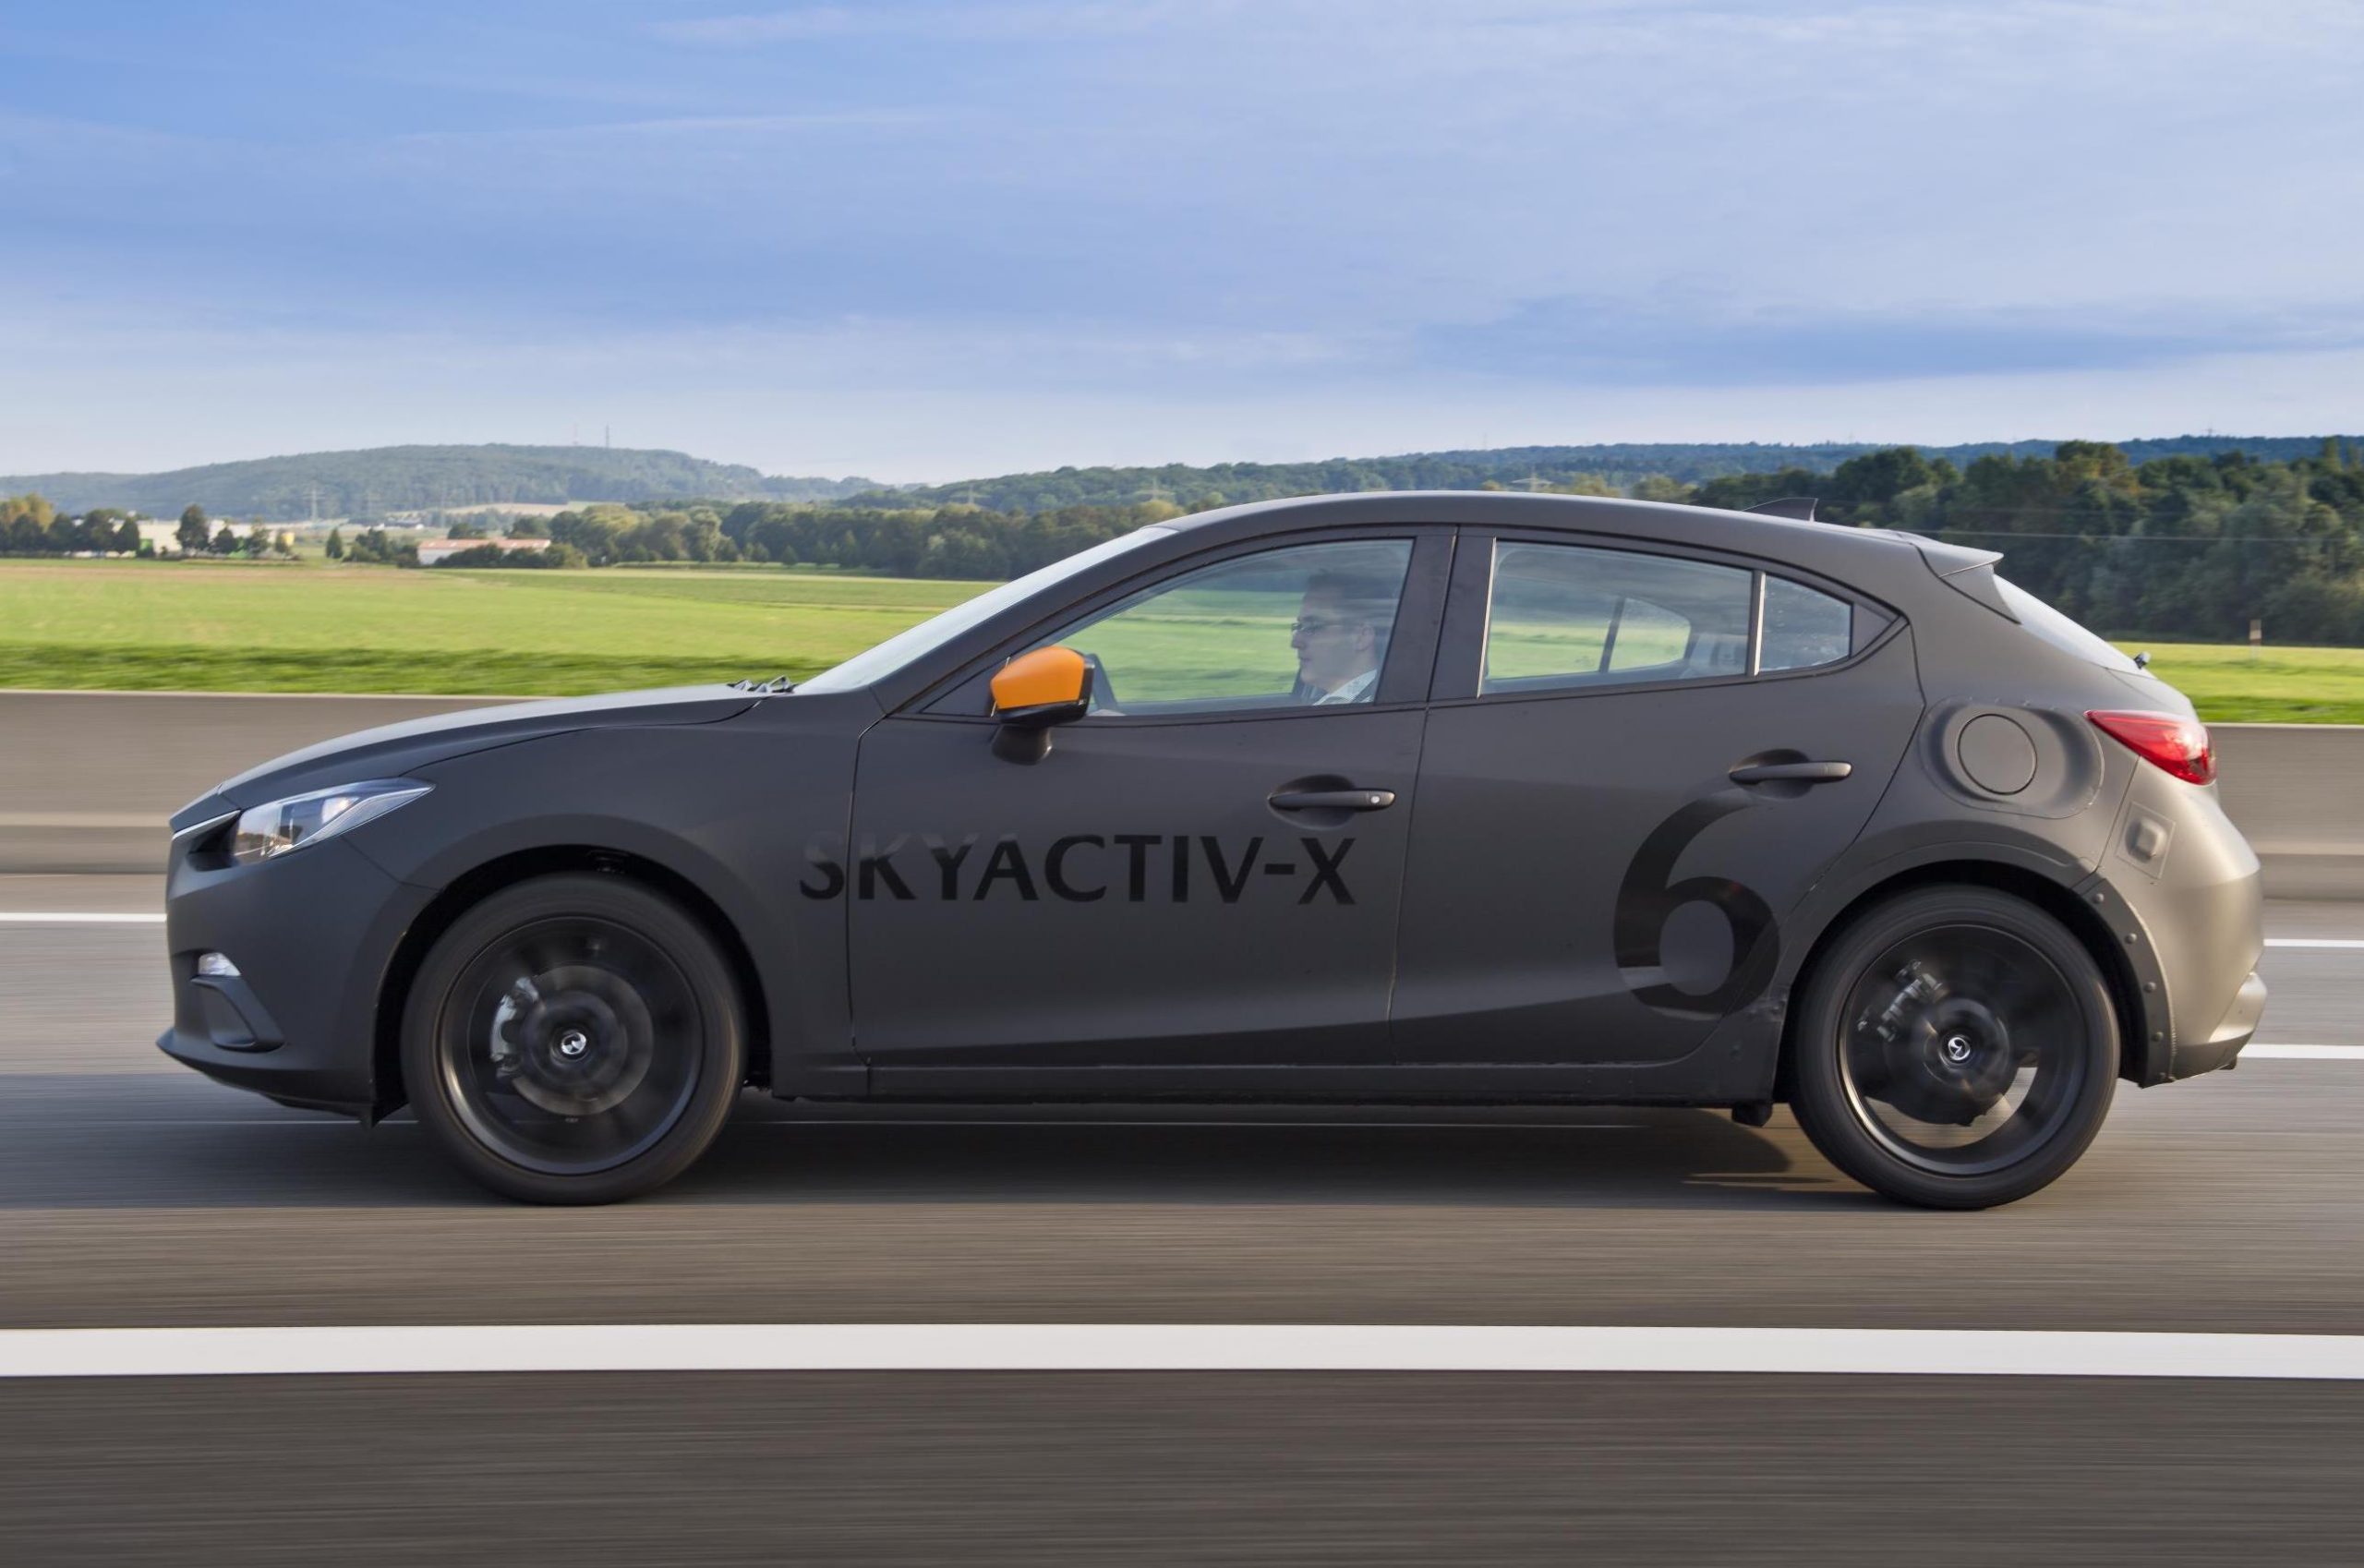 2019 Mazda3 to debut at LA show, featuring SkyActiv-X tech – report